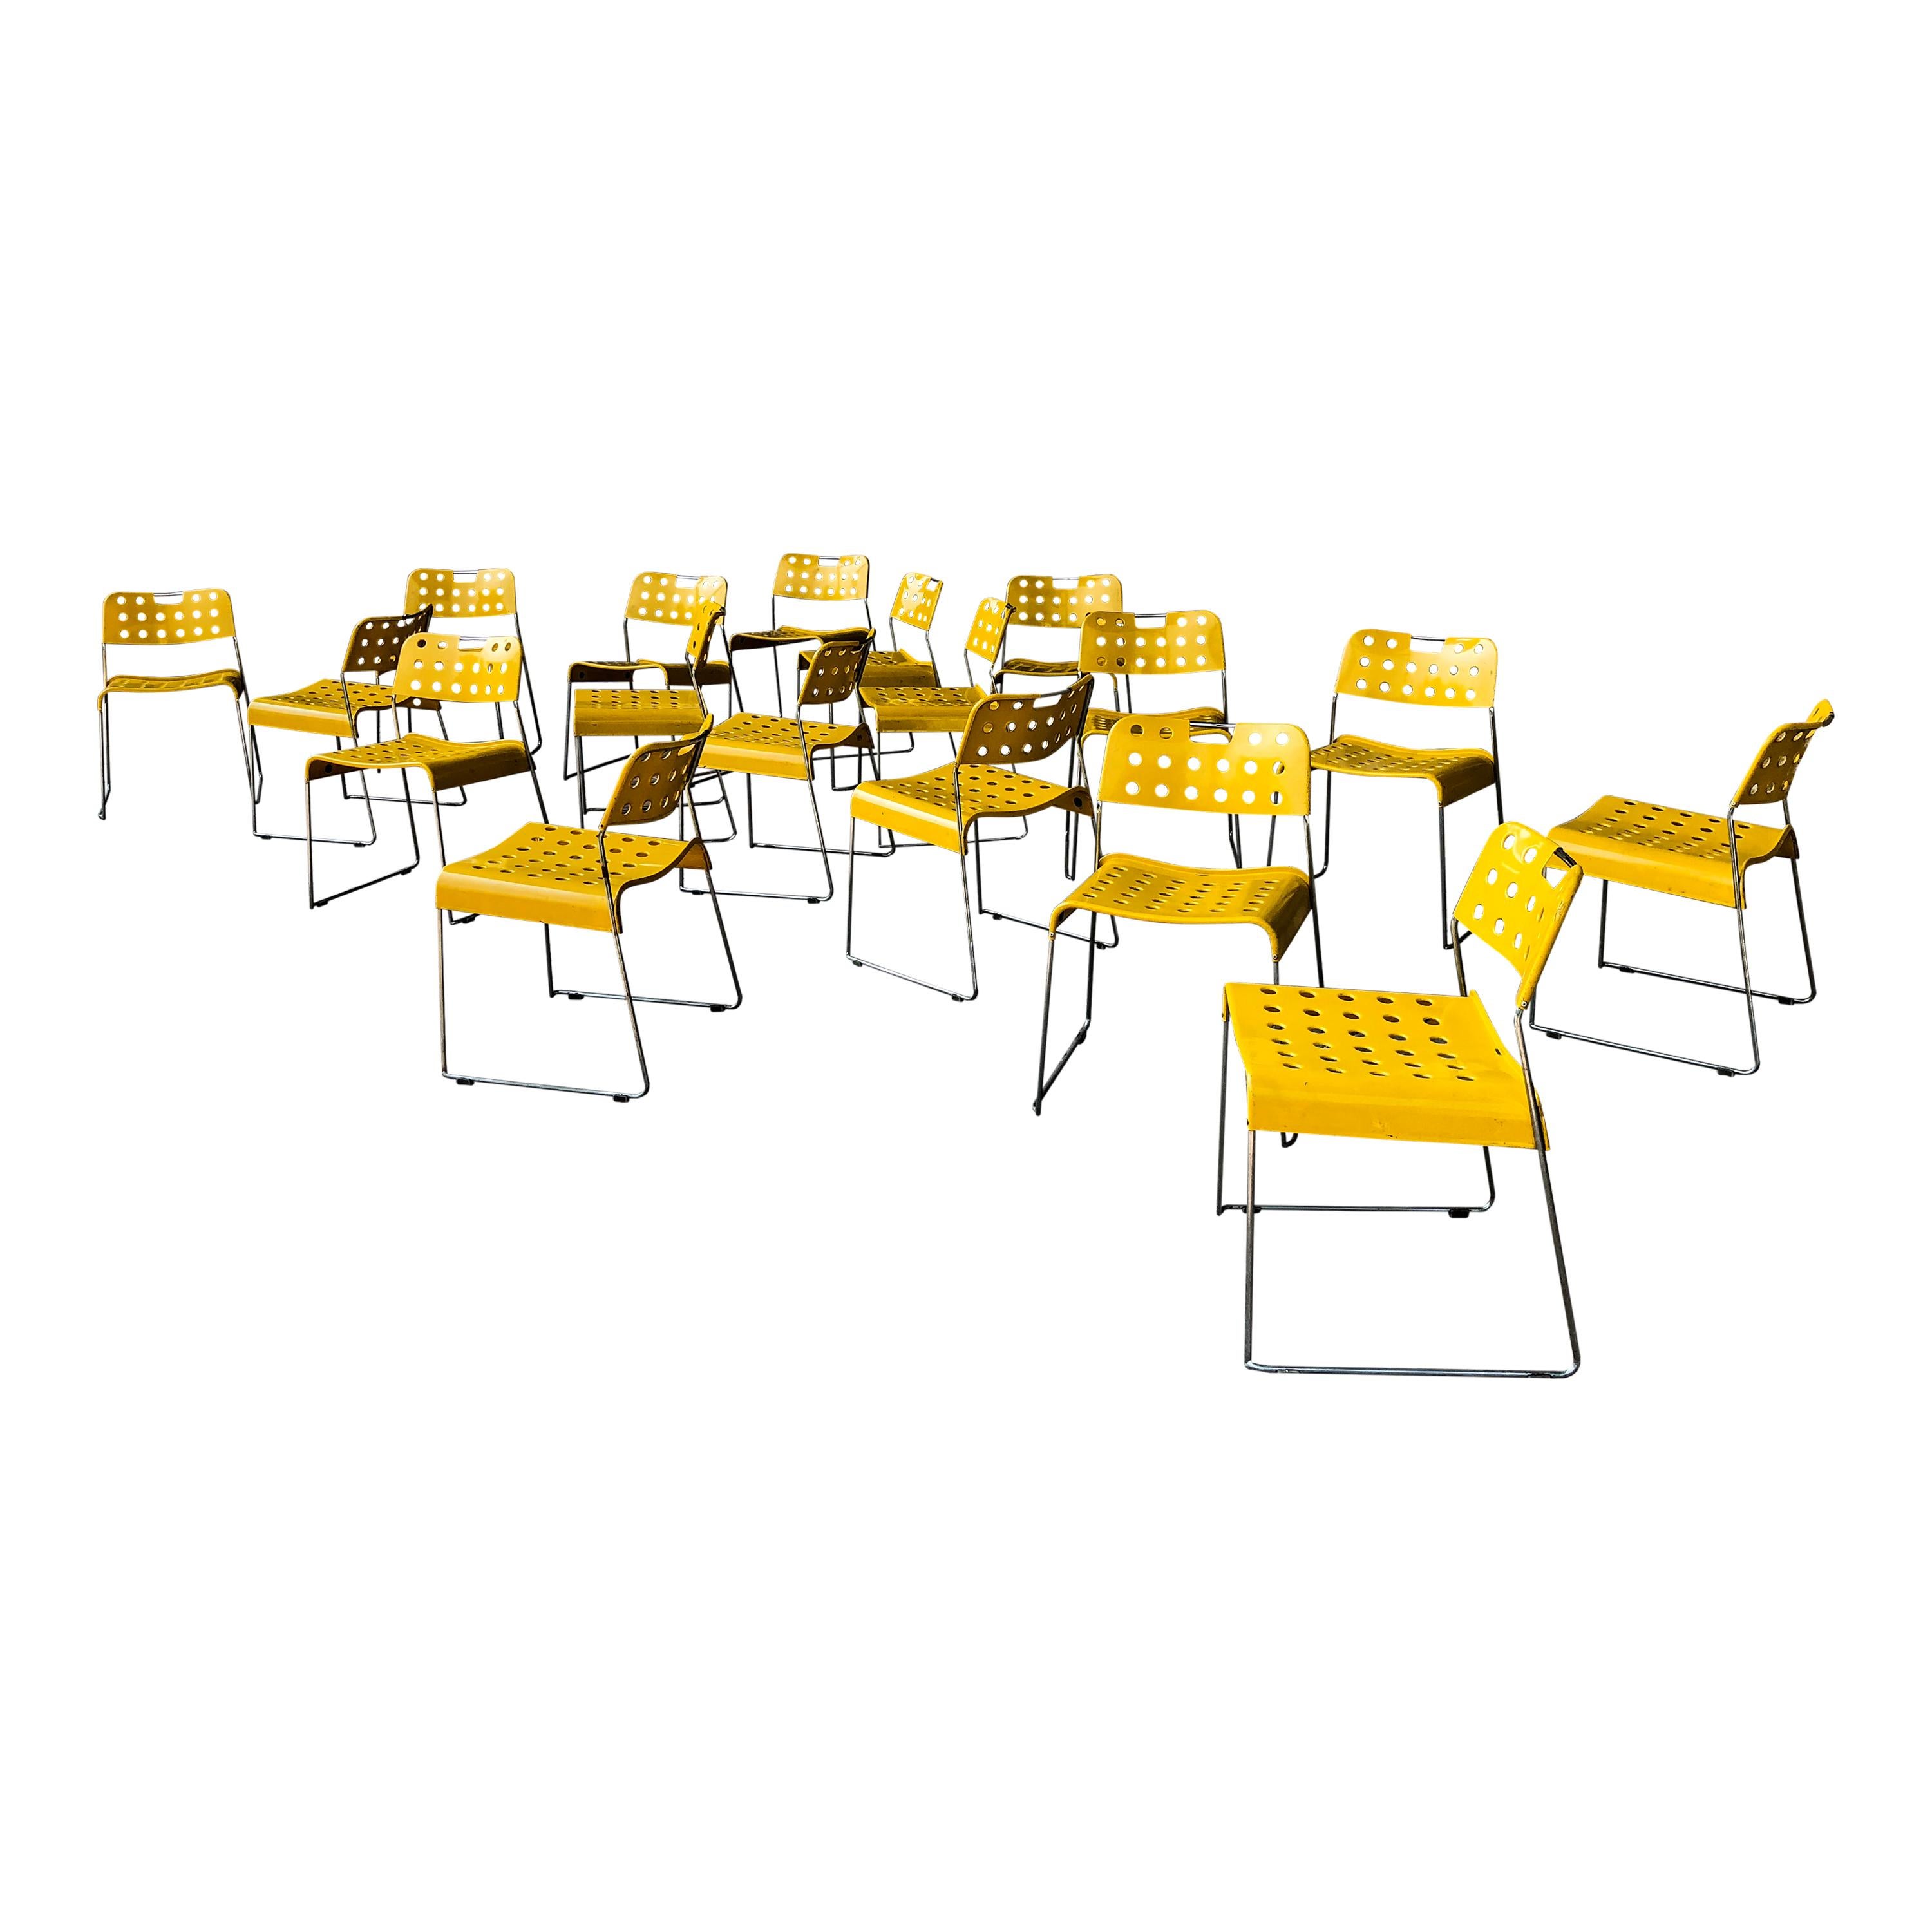 Rodney Kinsman Space Age Yellow Omstak Chair for Bieffeplast, 1971, Set of 10 For Sale 1